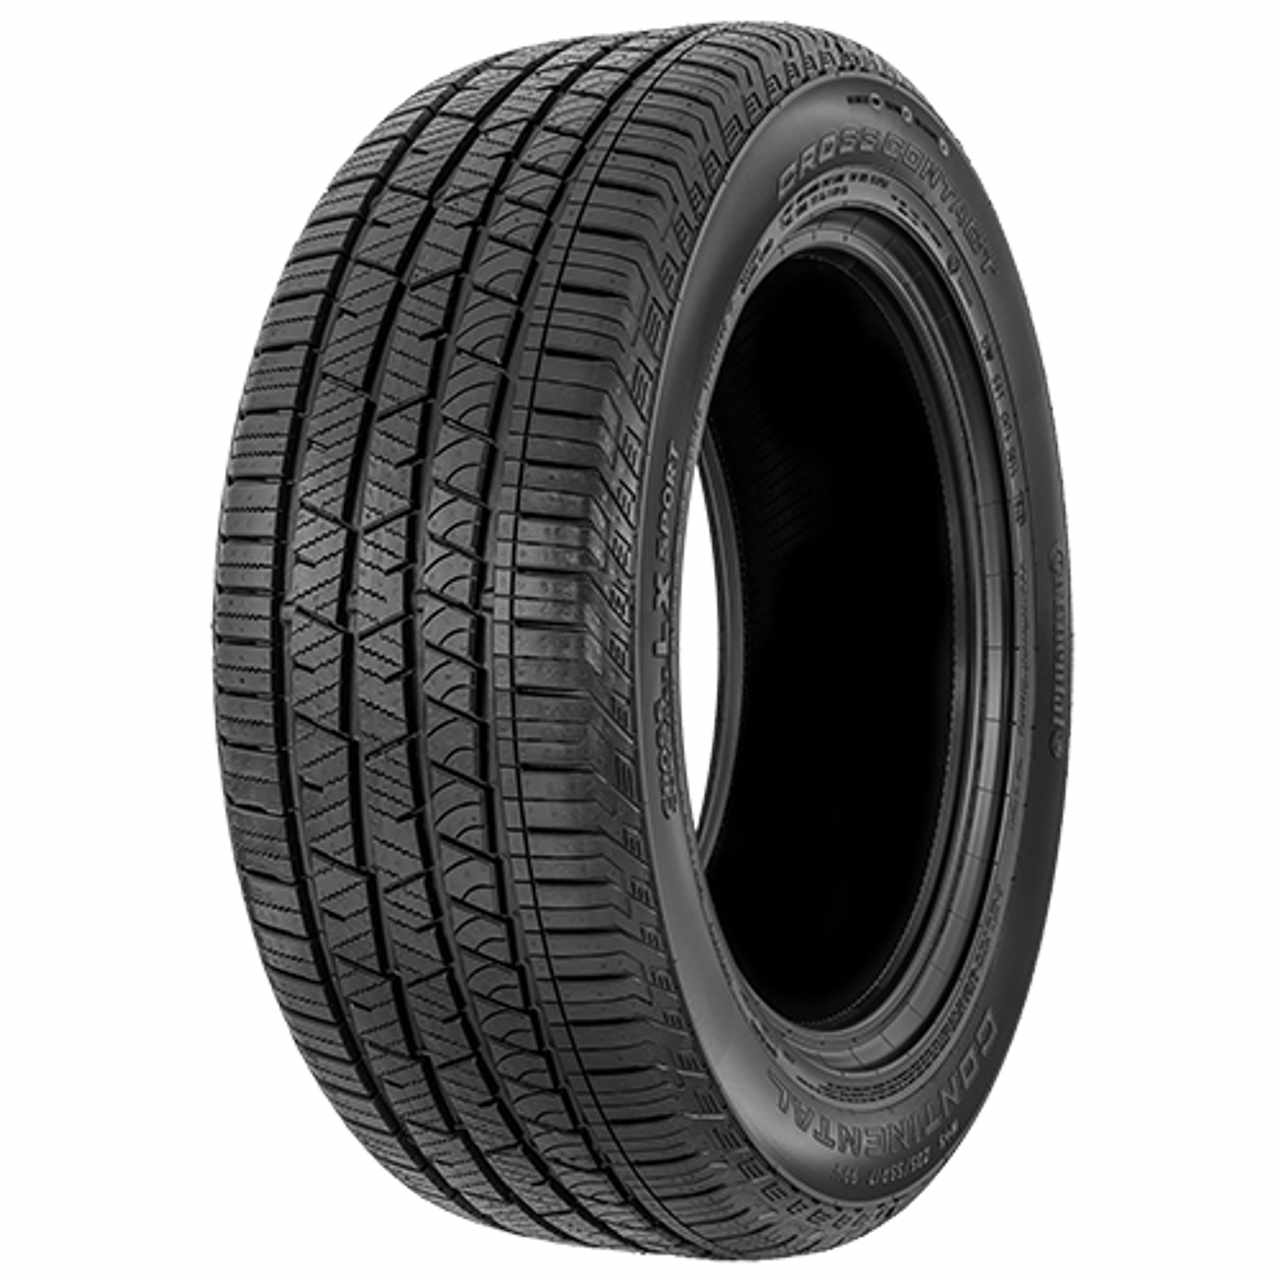 CONTINENTAL CROSSCONTACT LX SPORT (EVc) 245/60R18 105T FR BSW